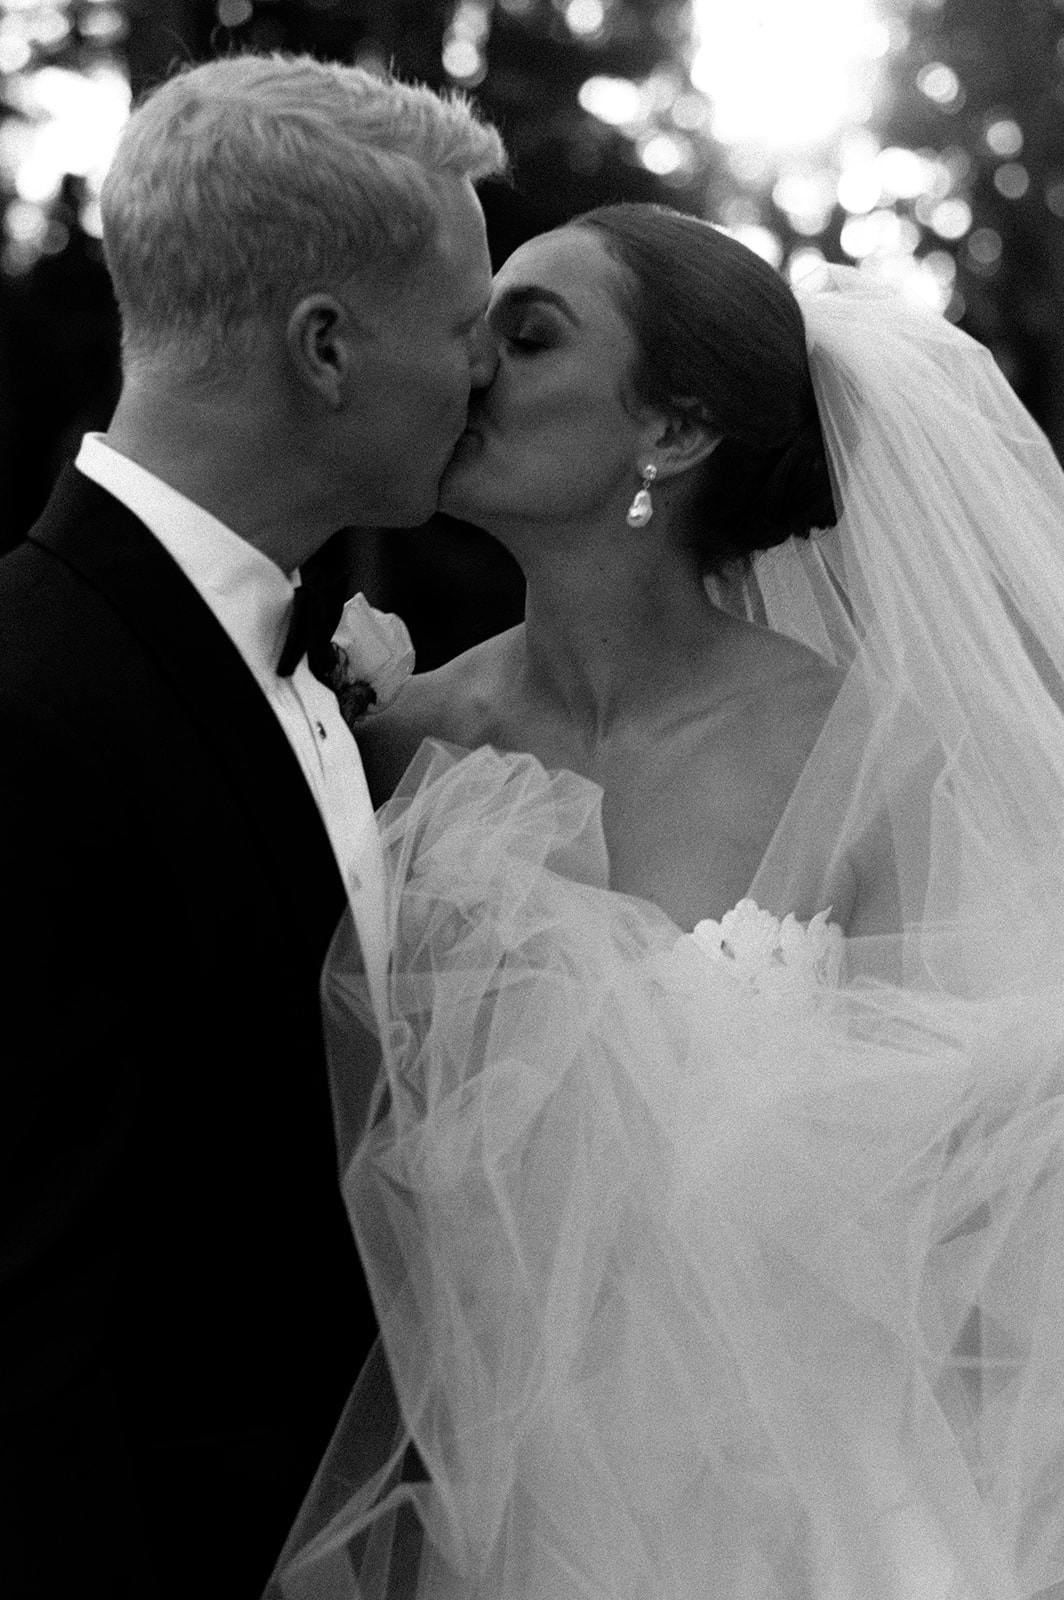 A bride and groom share a kiss outdoors. The bride is wearing a strapless gown with tulle and a veil, accompanied by drop earrings. The groom is in a tuxedo with a boutonnière. The black-and-white image has blurred background foliage and bright light filtering through.